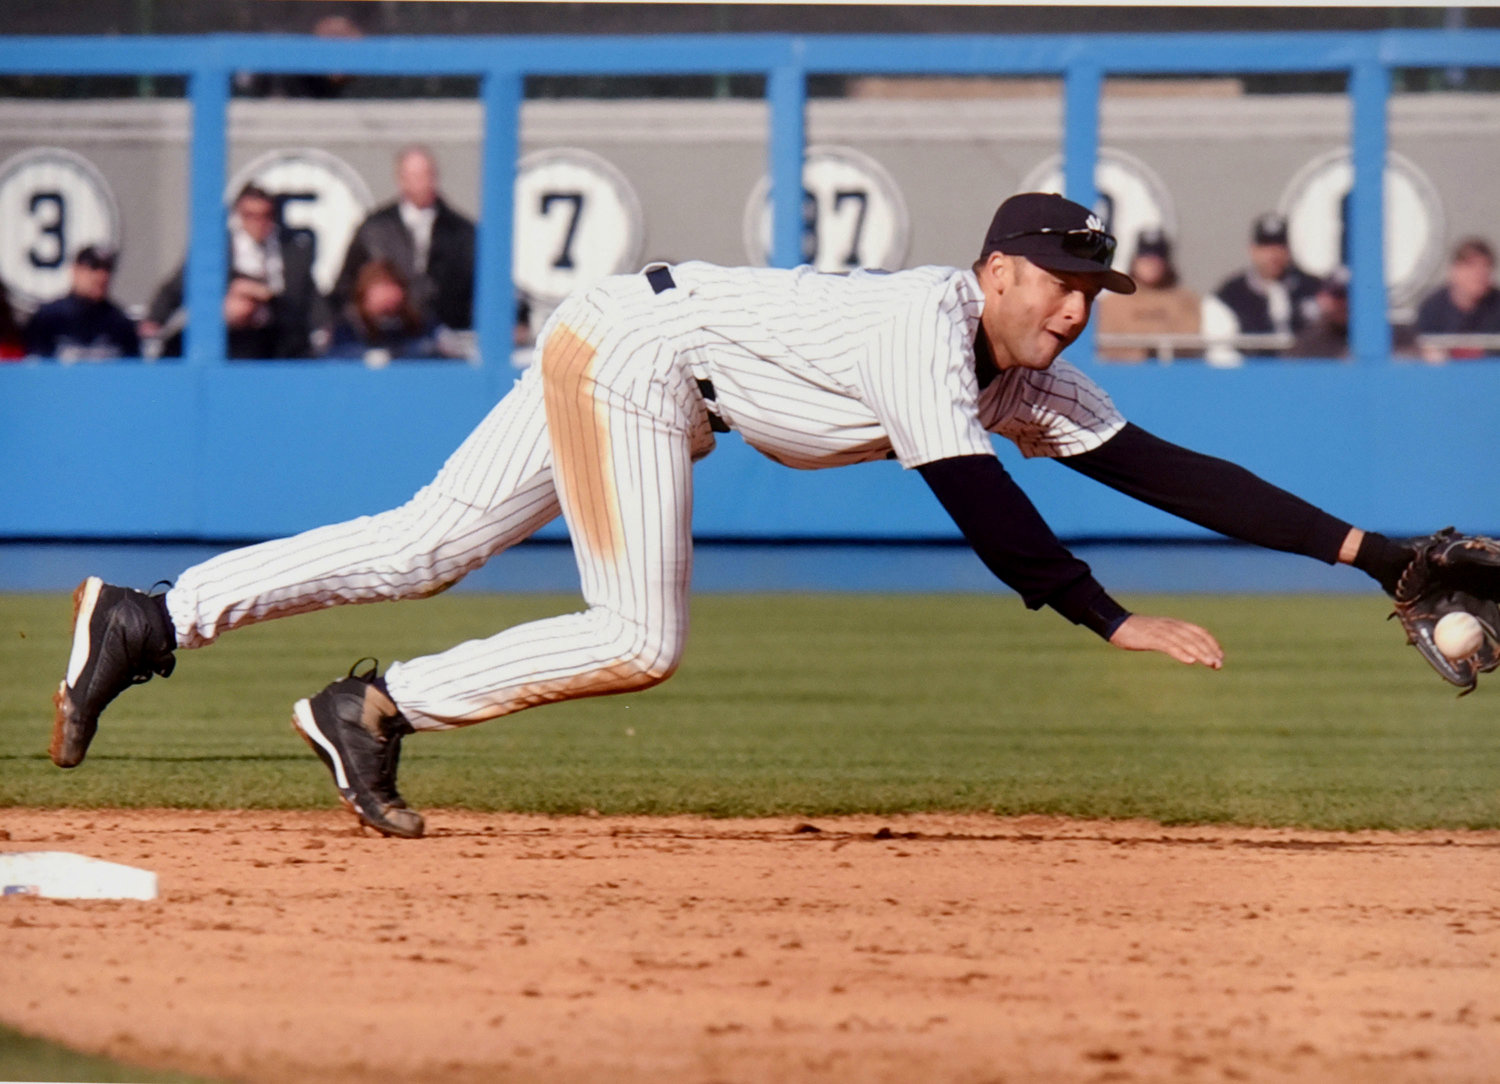 Shortstop Derek Jeter, shown diving for a ground ball, will be the second New York Yankee in as many years inducted in the Baseball Hall of Fame in Cooperstown July 26. Relief pitcher Mariano Rivera was inducted last year.